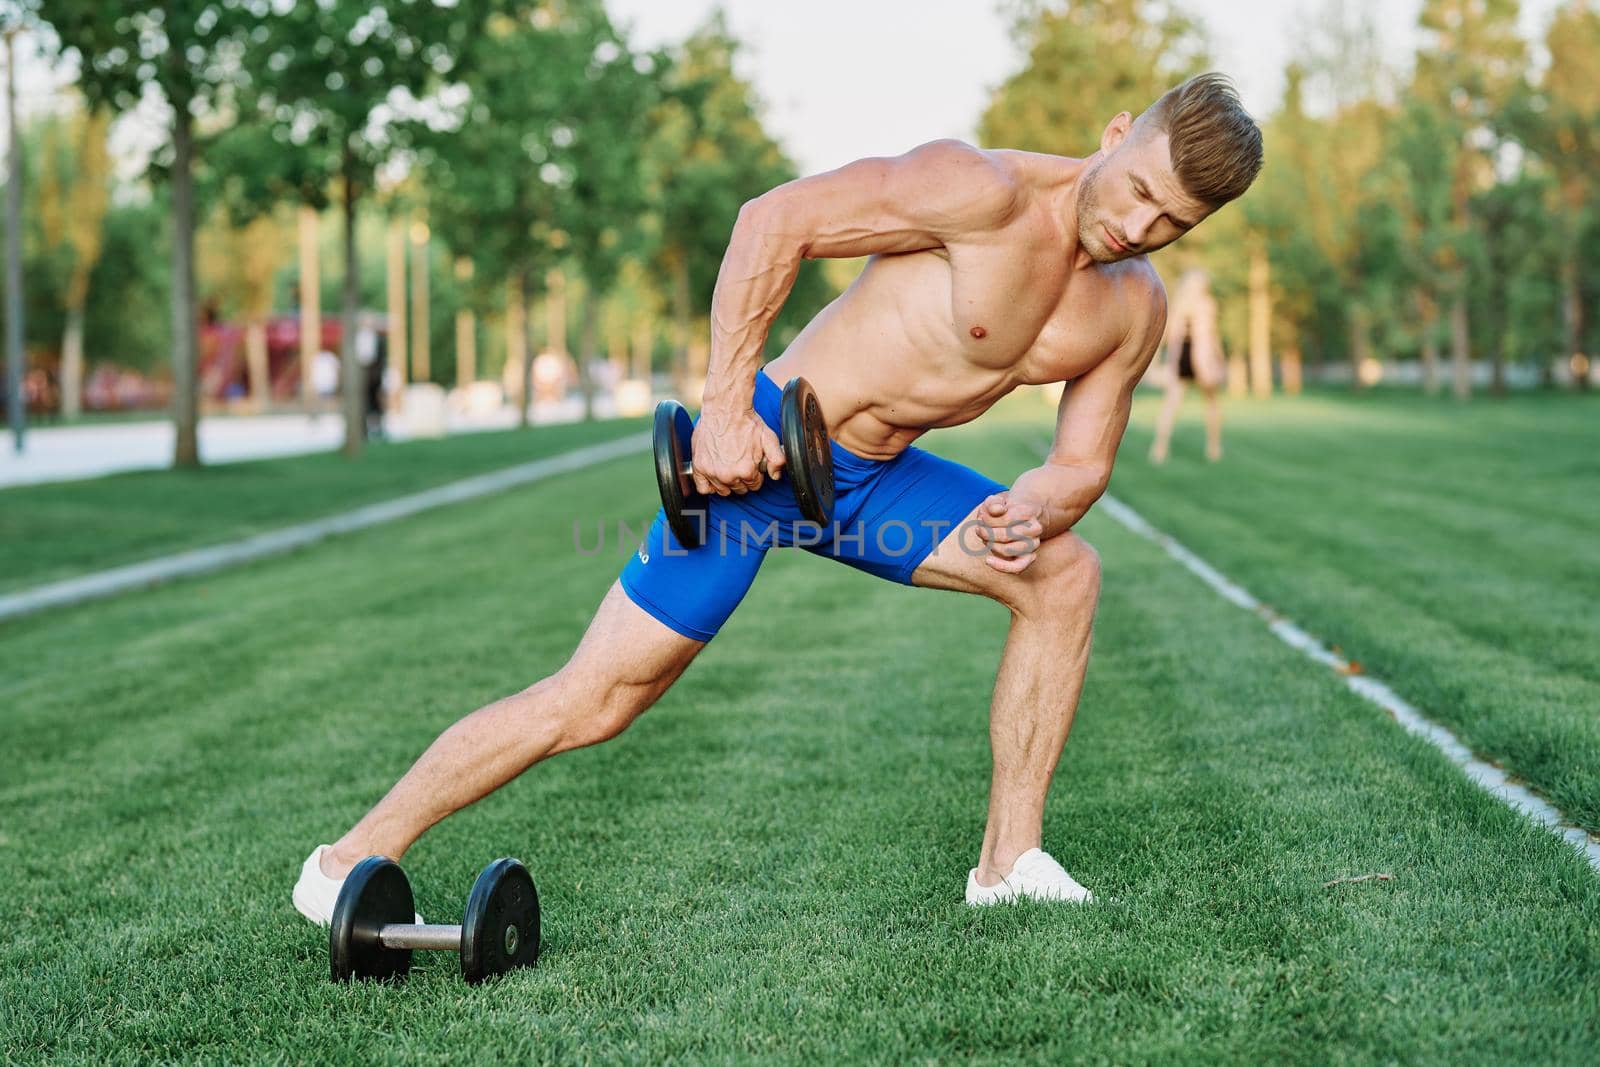 sporty man with pumped up body in park workout exercise. High quality photo